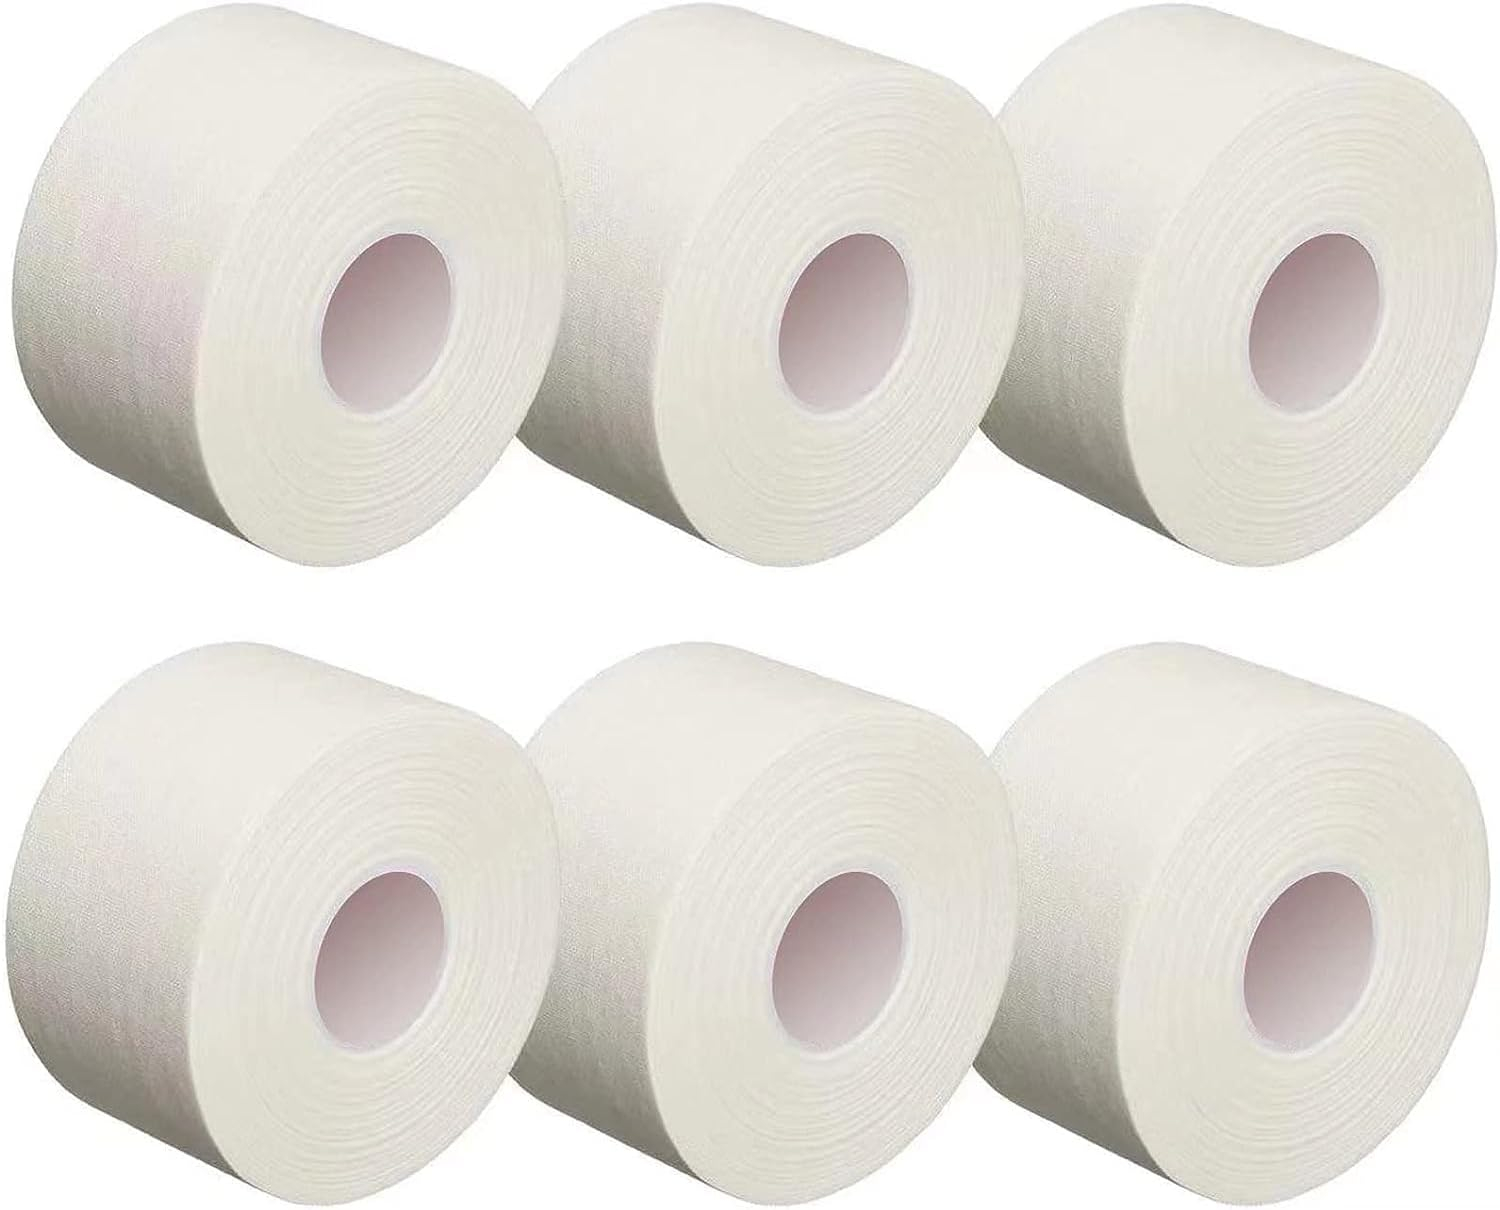 Popbob (6 Pack) White Athletic Sports Tape, Very Strong Adhesive and Hypoallergenic Breathable Cotton Sports Tape for Bats, Tennis and Boxing